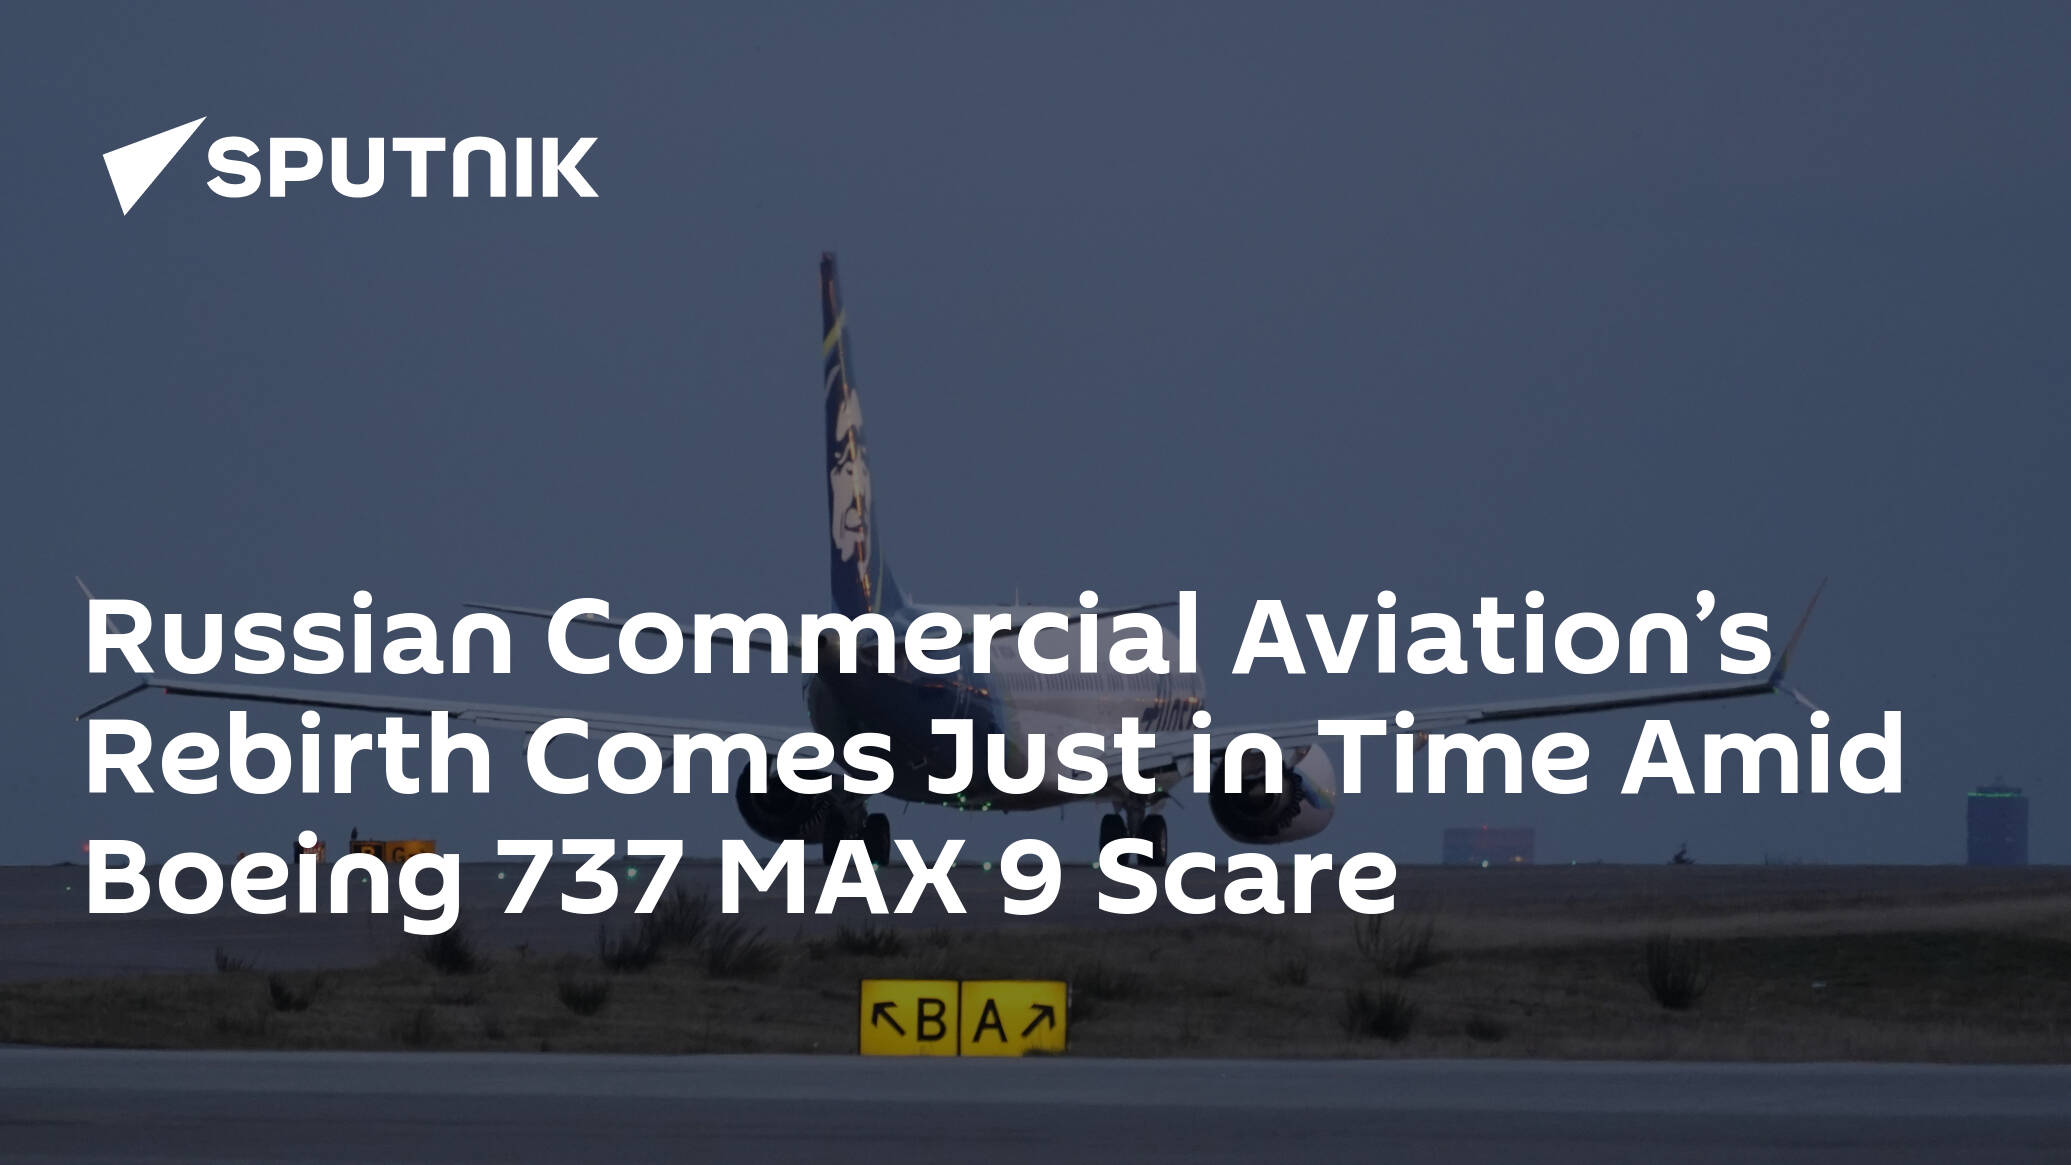 Russian Industrial Aviation’s Rebirth Comes Simply in Time Amid Boeing 737 MAX 9 Scare